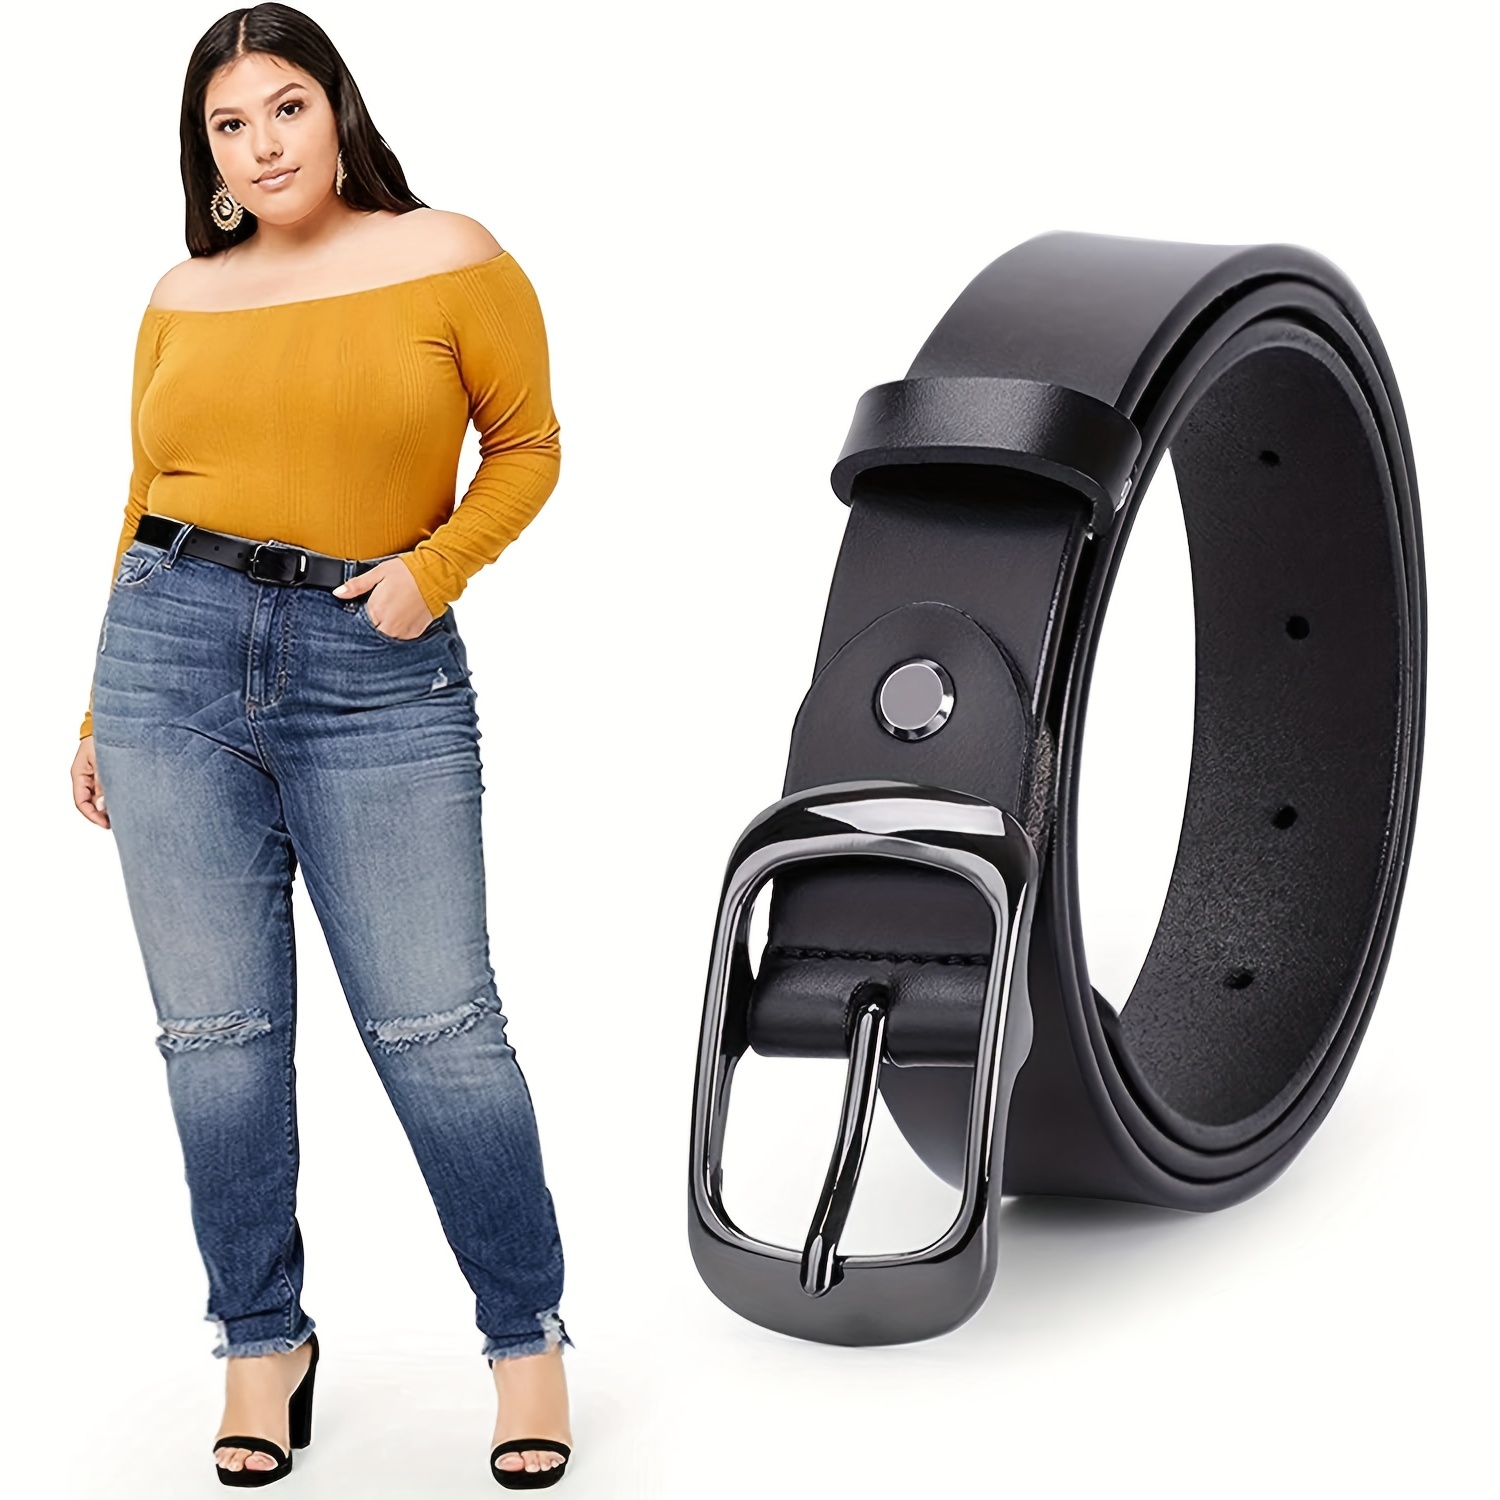 Looking for plus size belts? Shop our stretch belts.